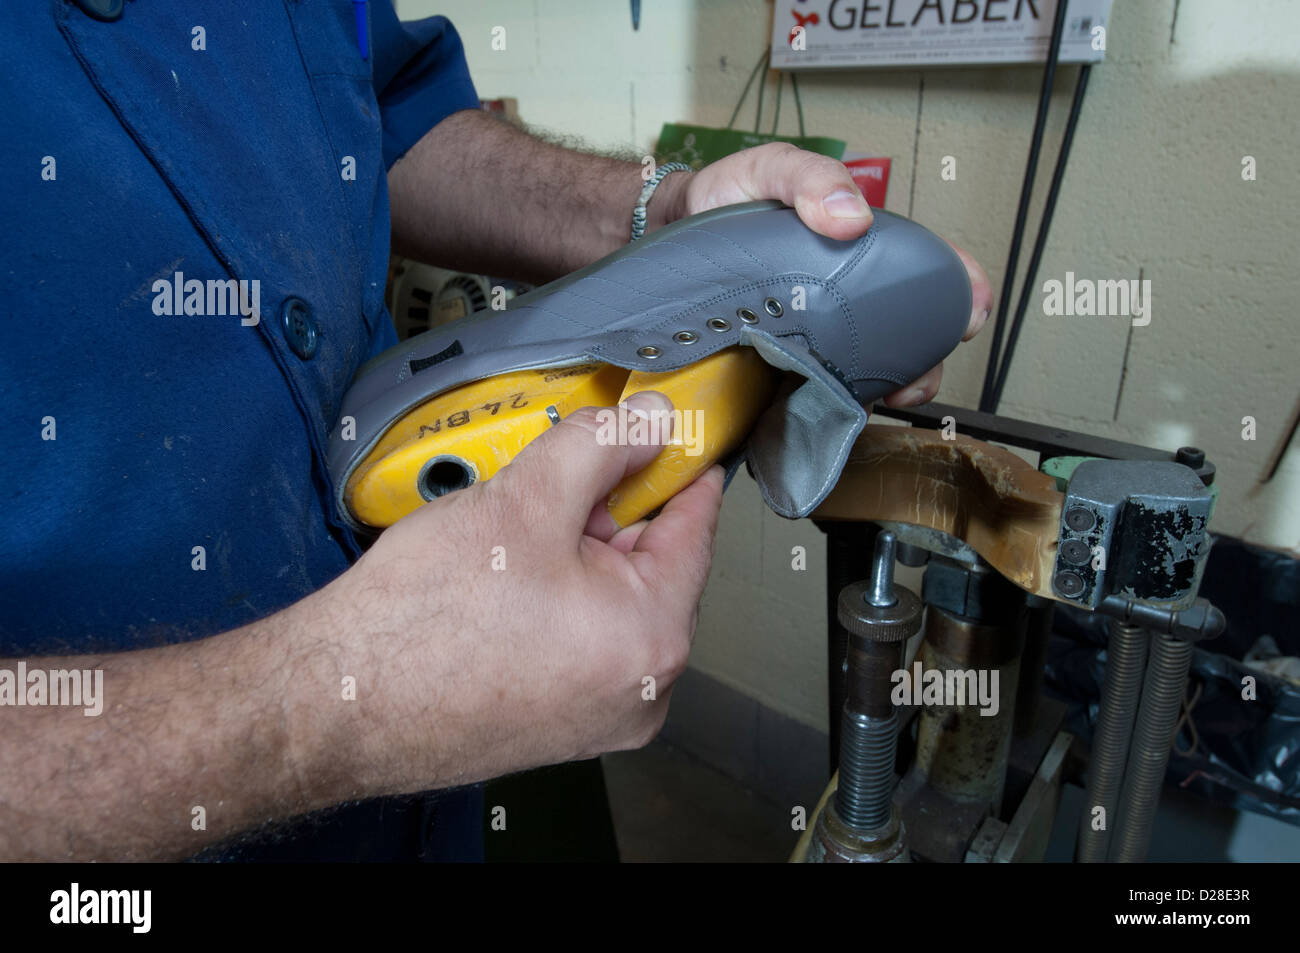 A shoe maker removed the last during the manufacturing process Stock Photo